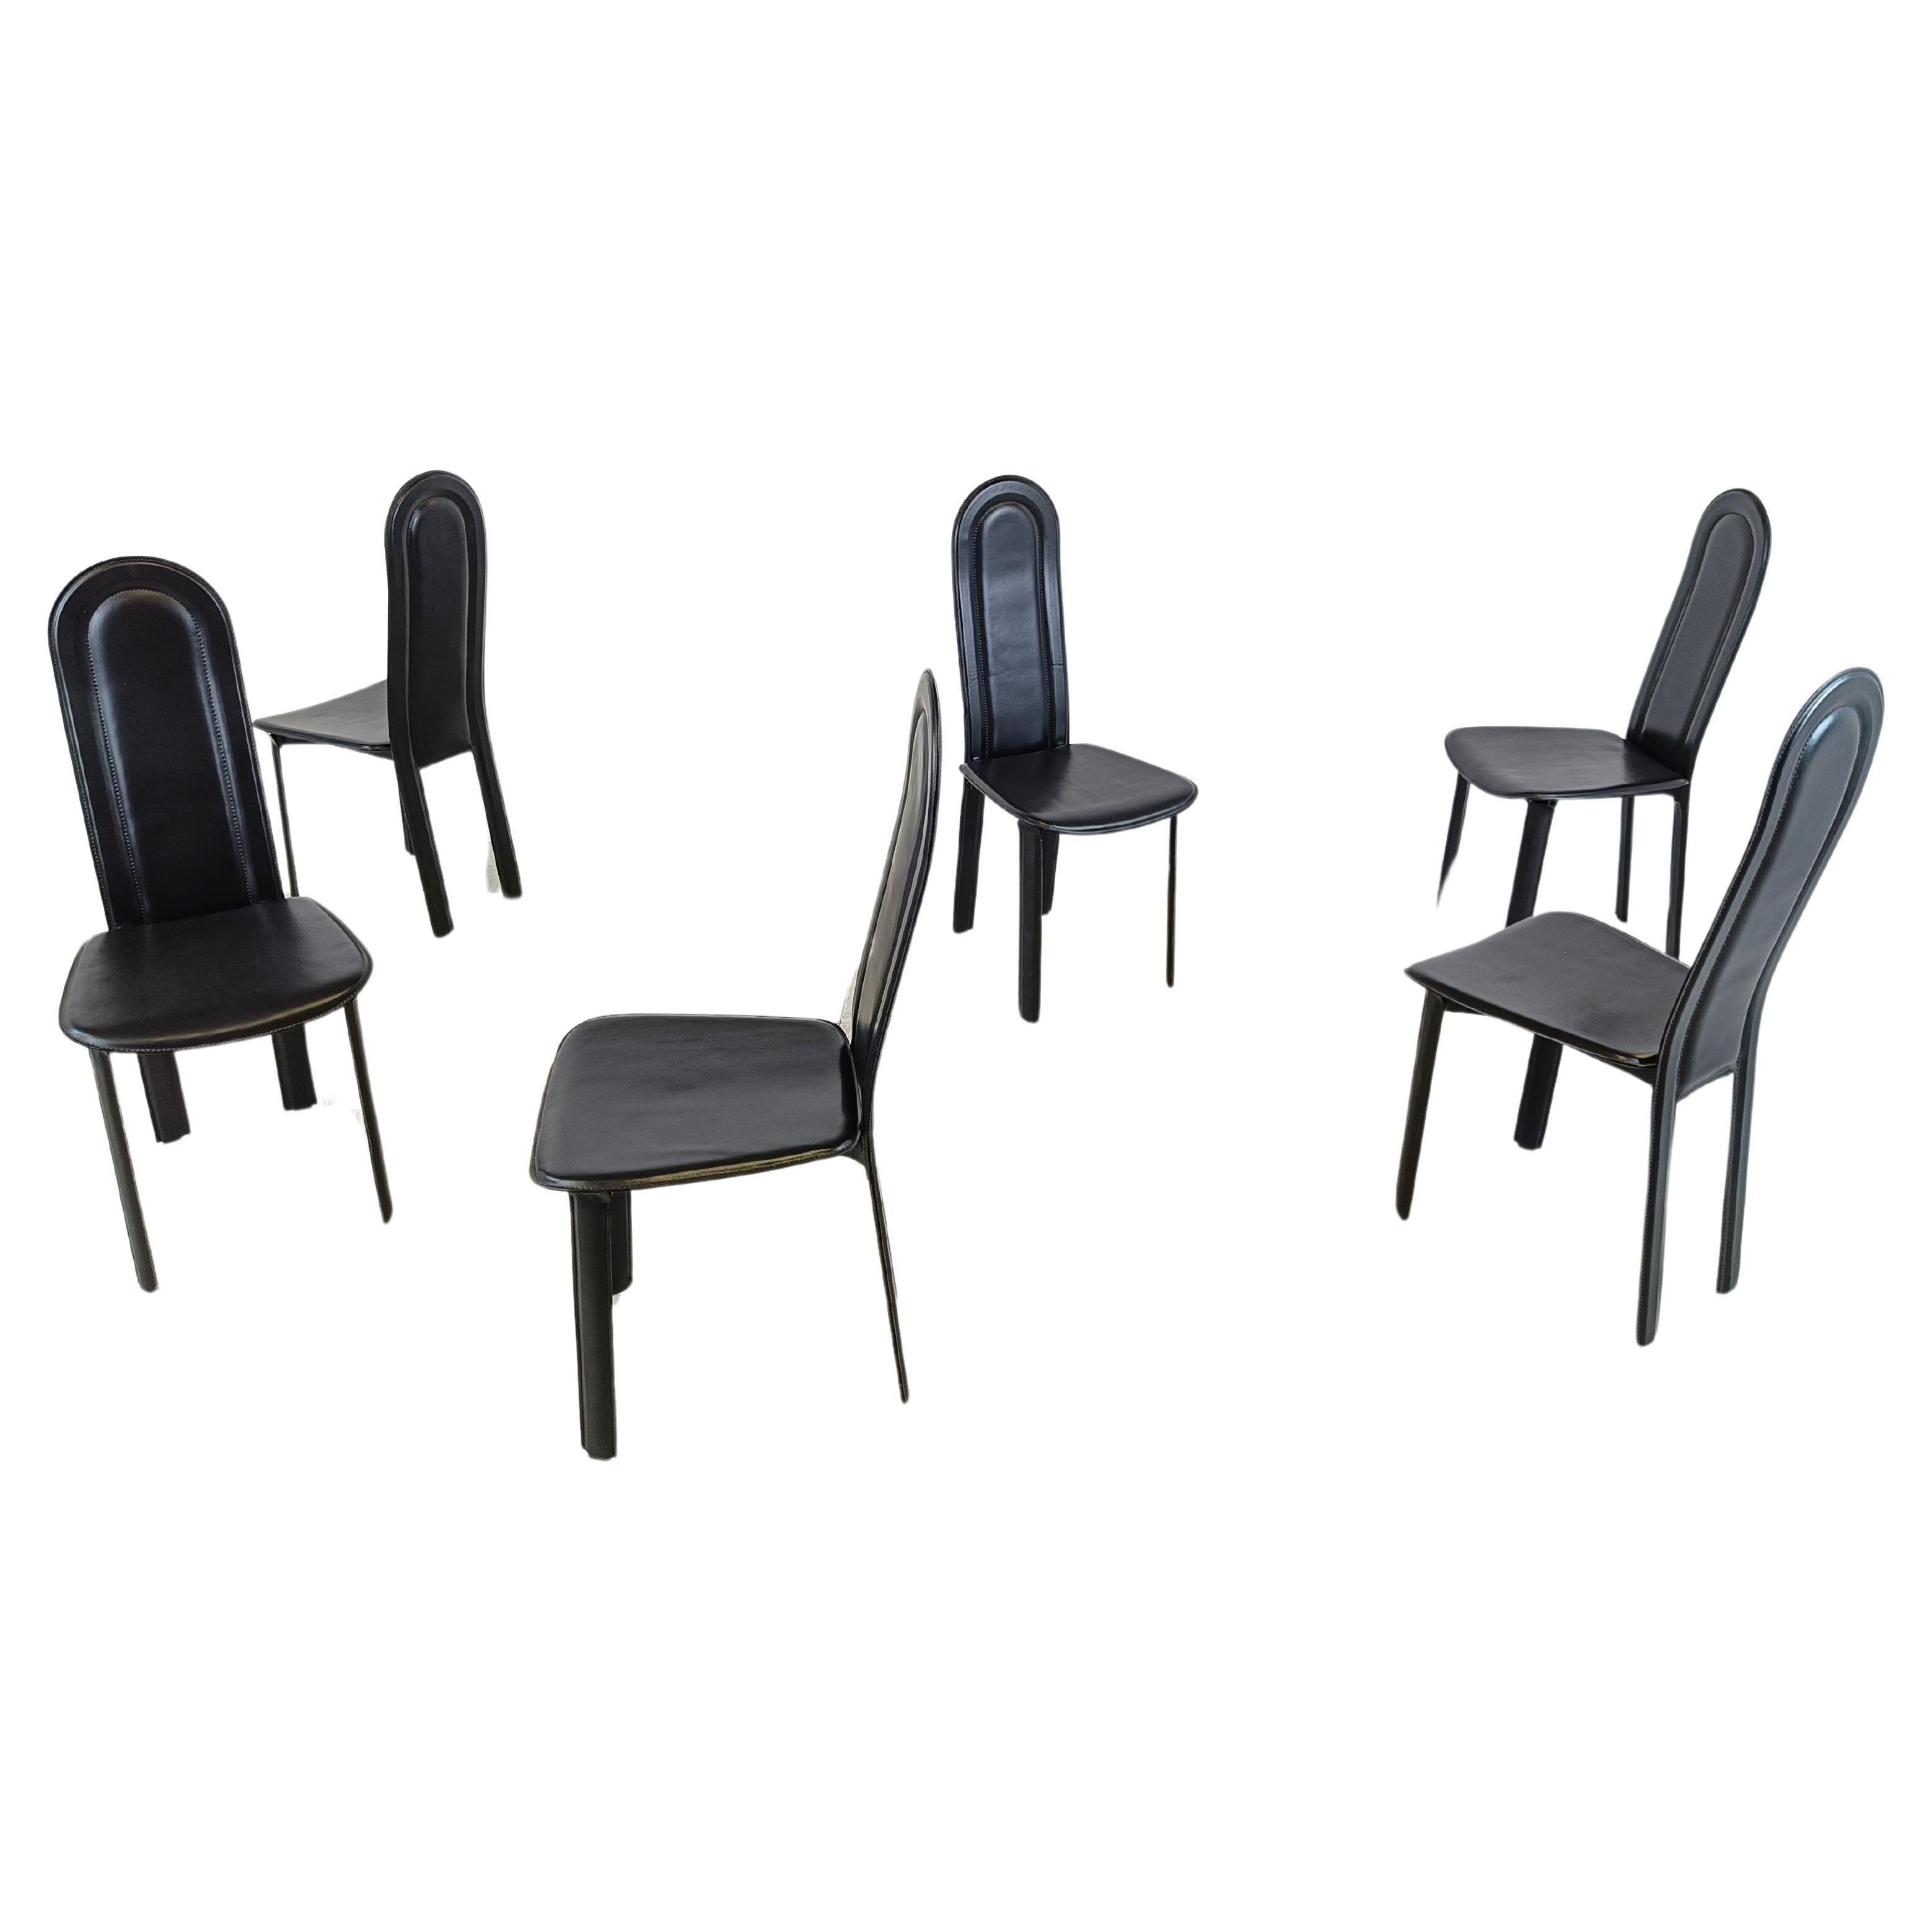 Vintage black leather dining chairs by Calligaris, set of 6, 1980s